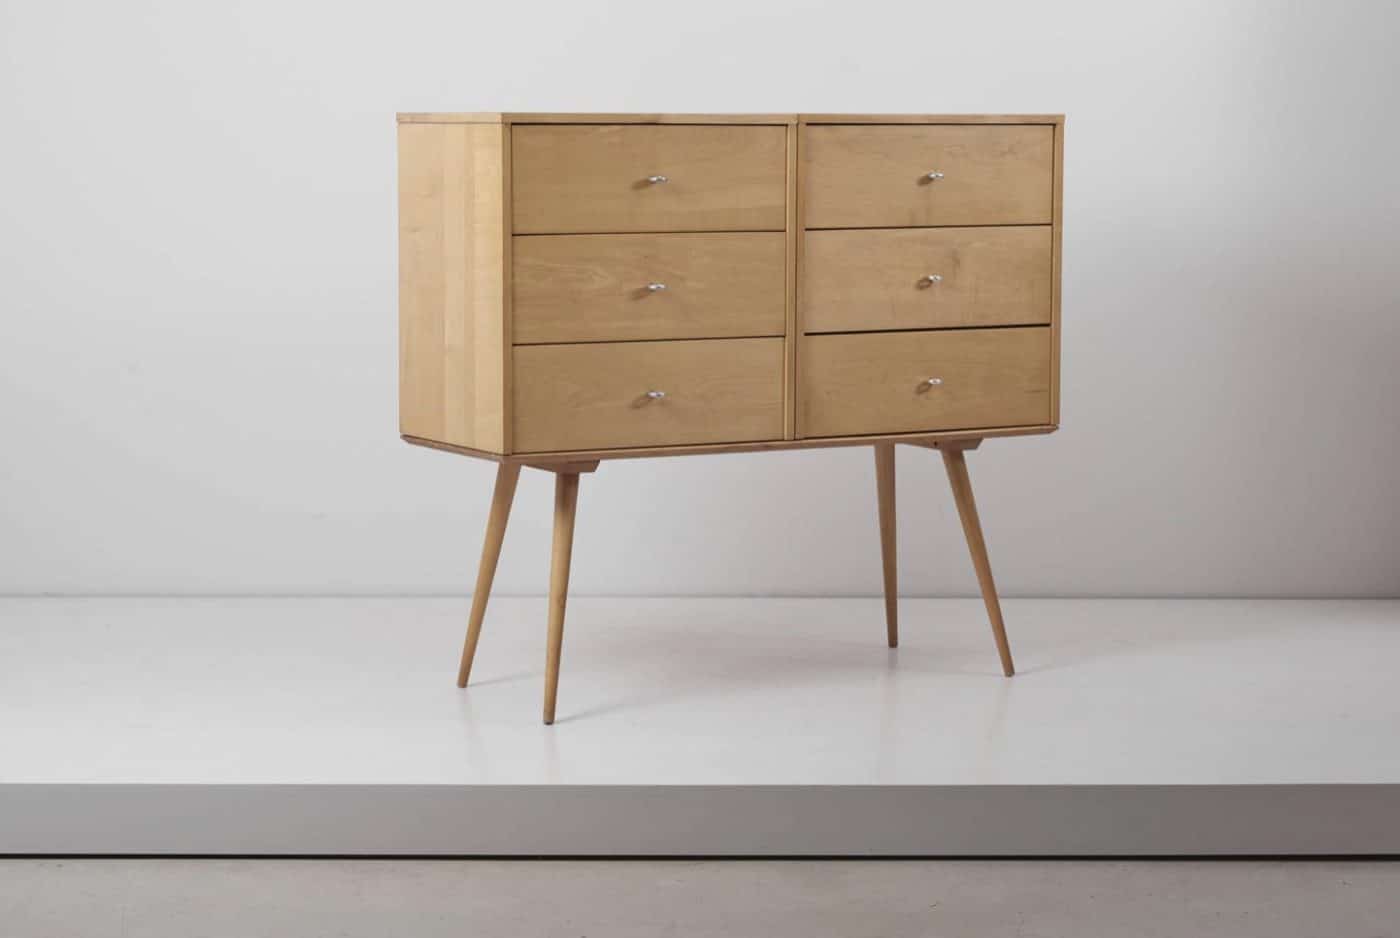 A light maple chest of drawers designed by Paul McCobb with aluminum drawer pulls